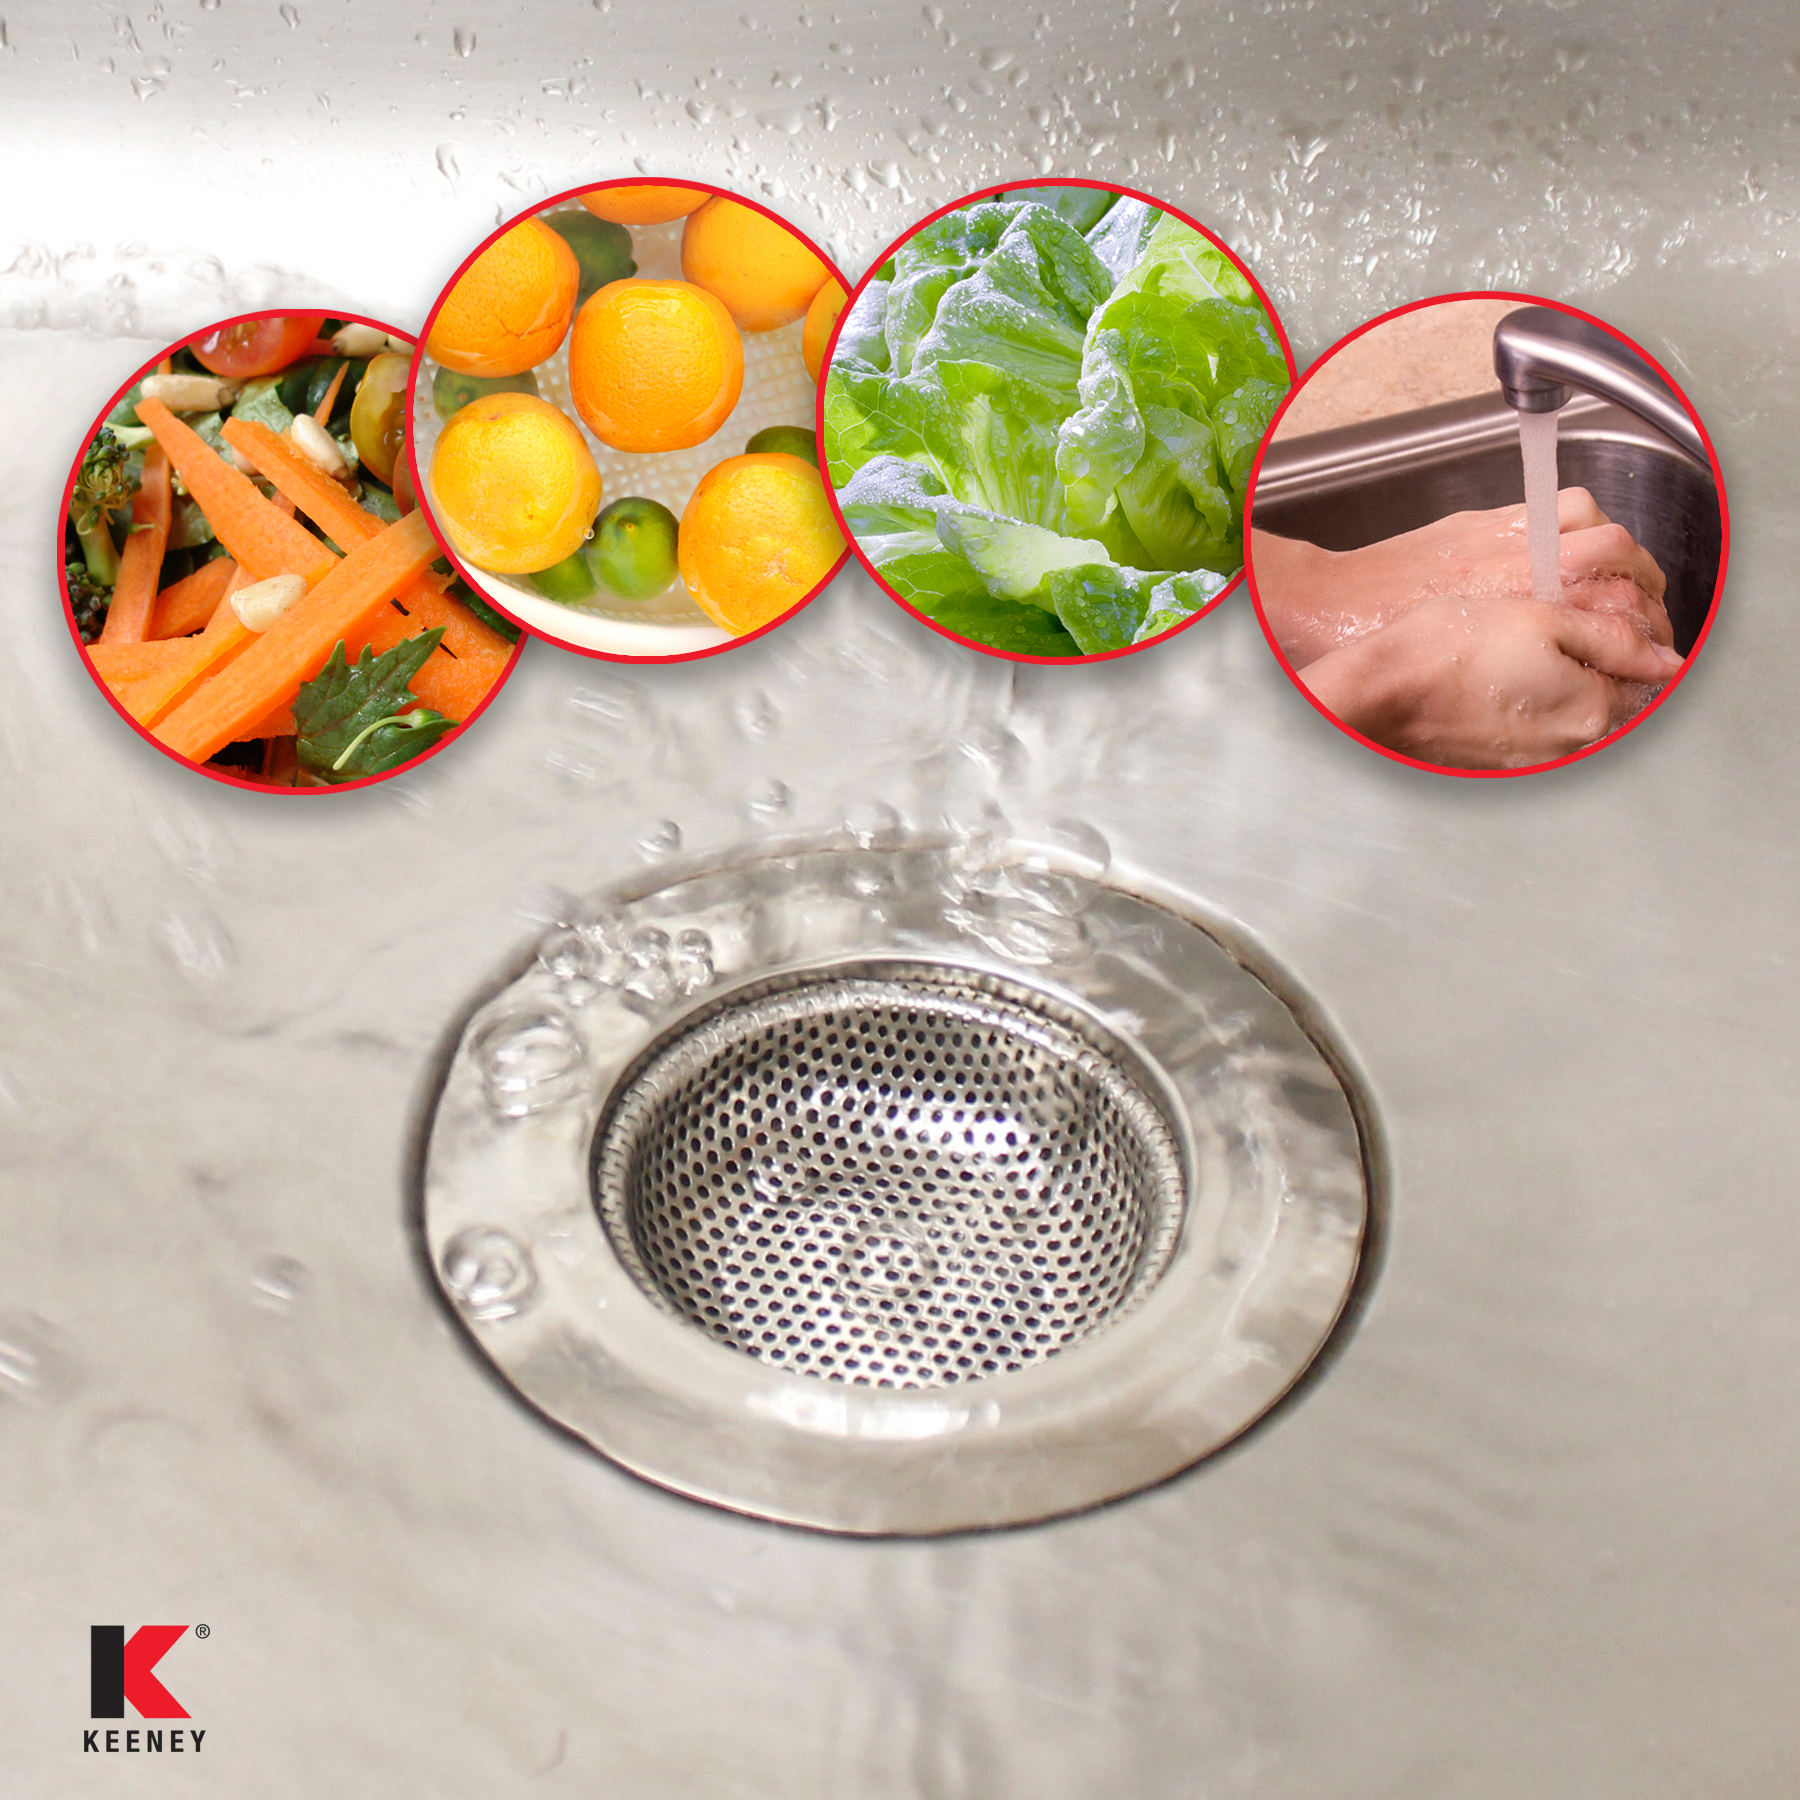 Kitchen Sink Strainer - Food Catcher for Most Sink Drains - Rust Free  Stainless Steel - 2 Pack - 4.5 Inch Diameter